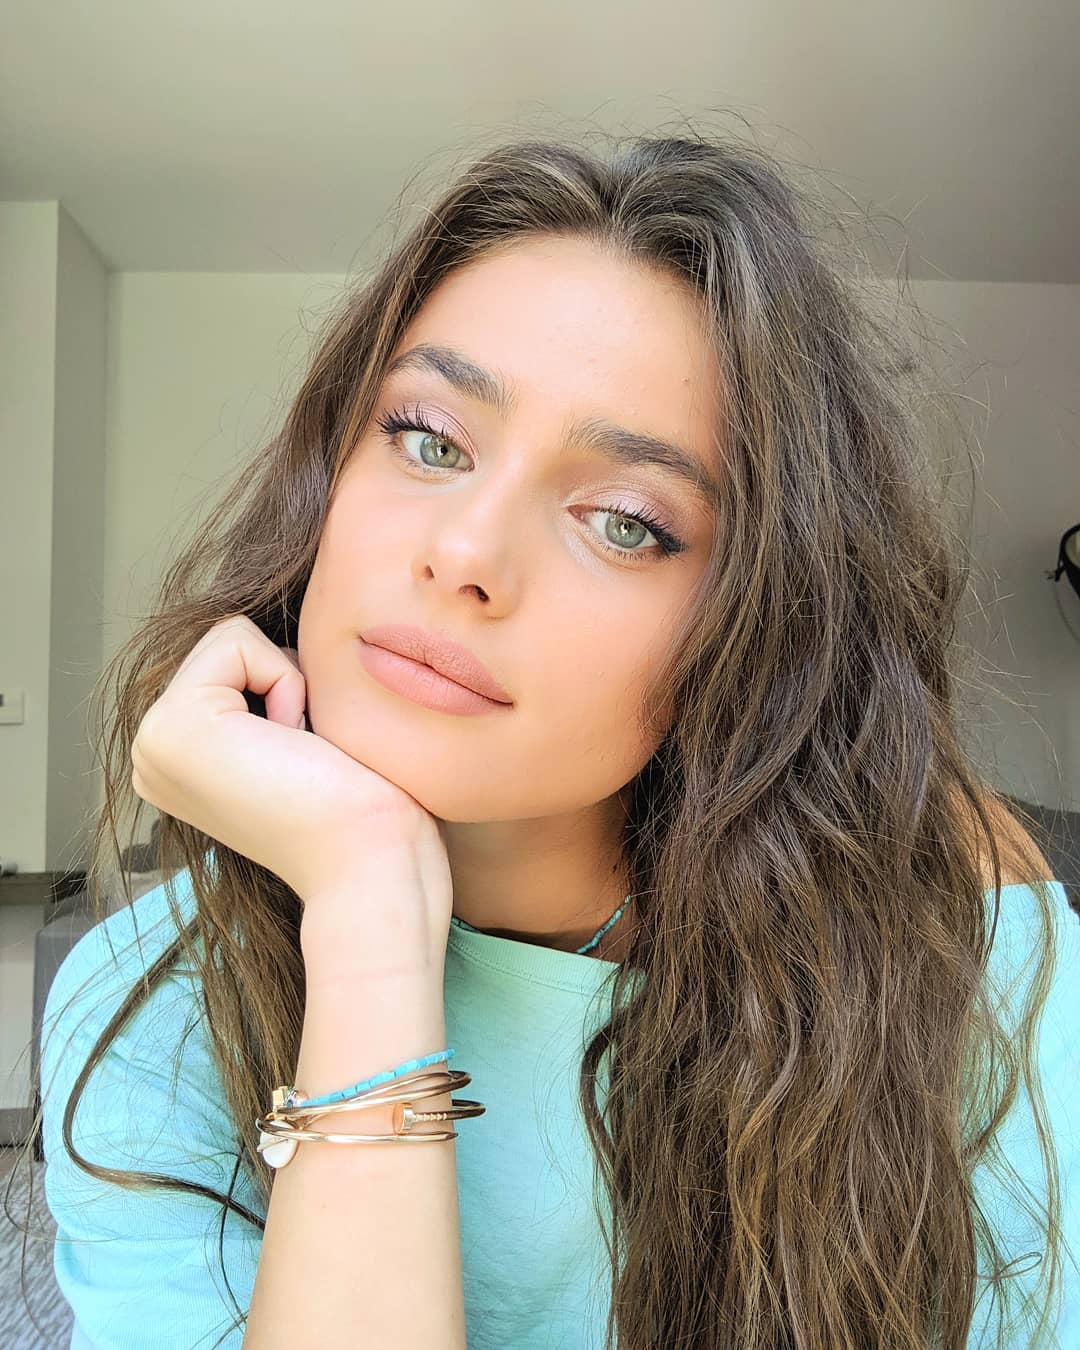 Taylor hill 14 hottest pics, taylor hill 14 instagram